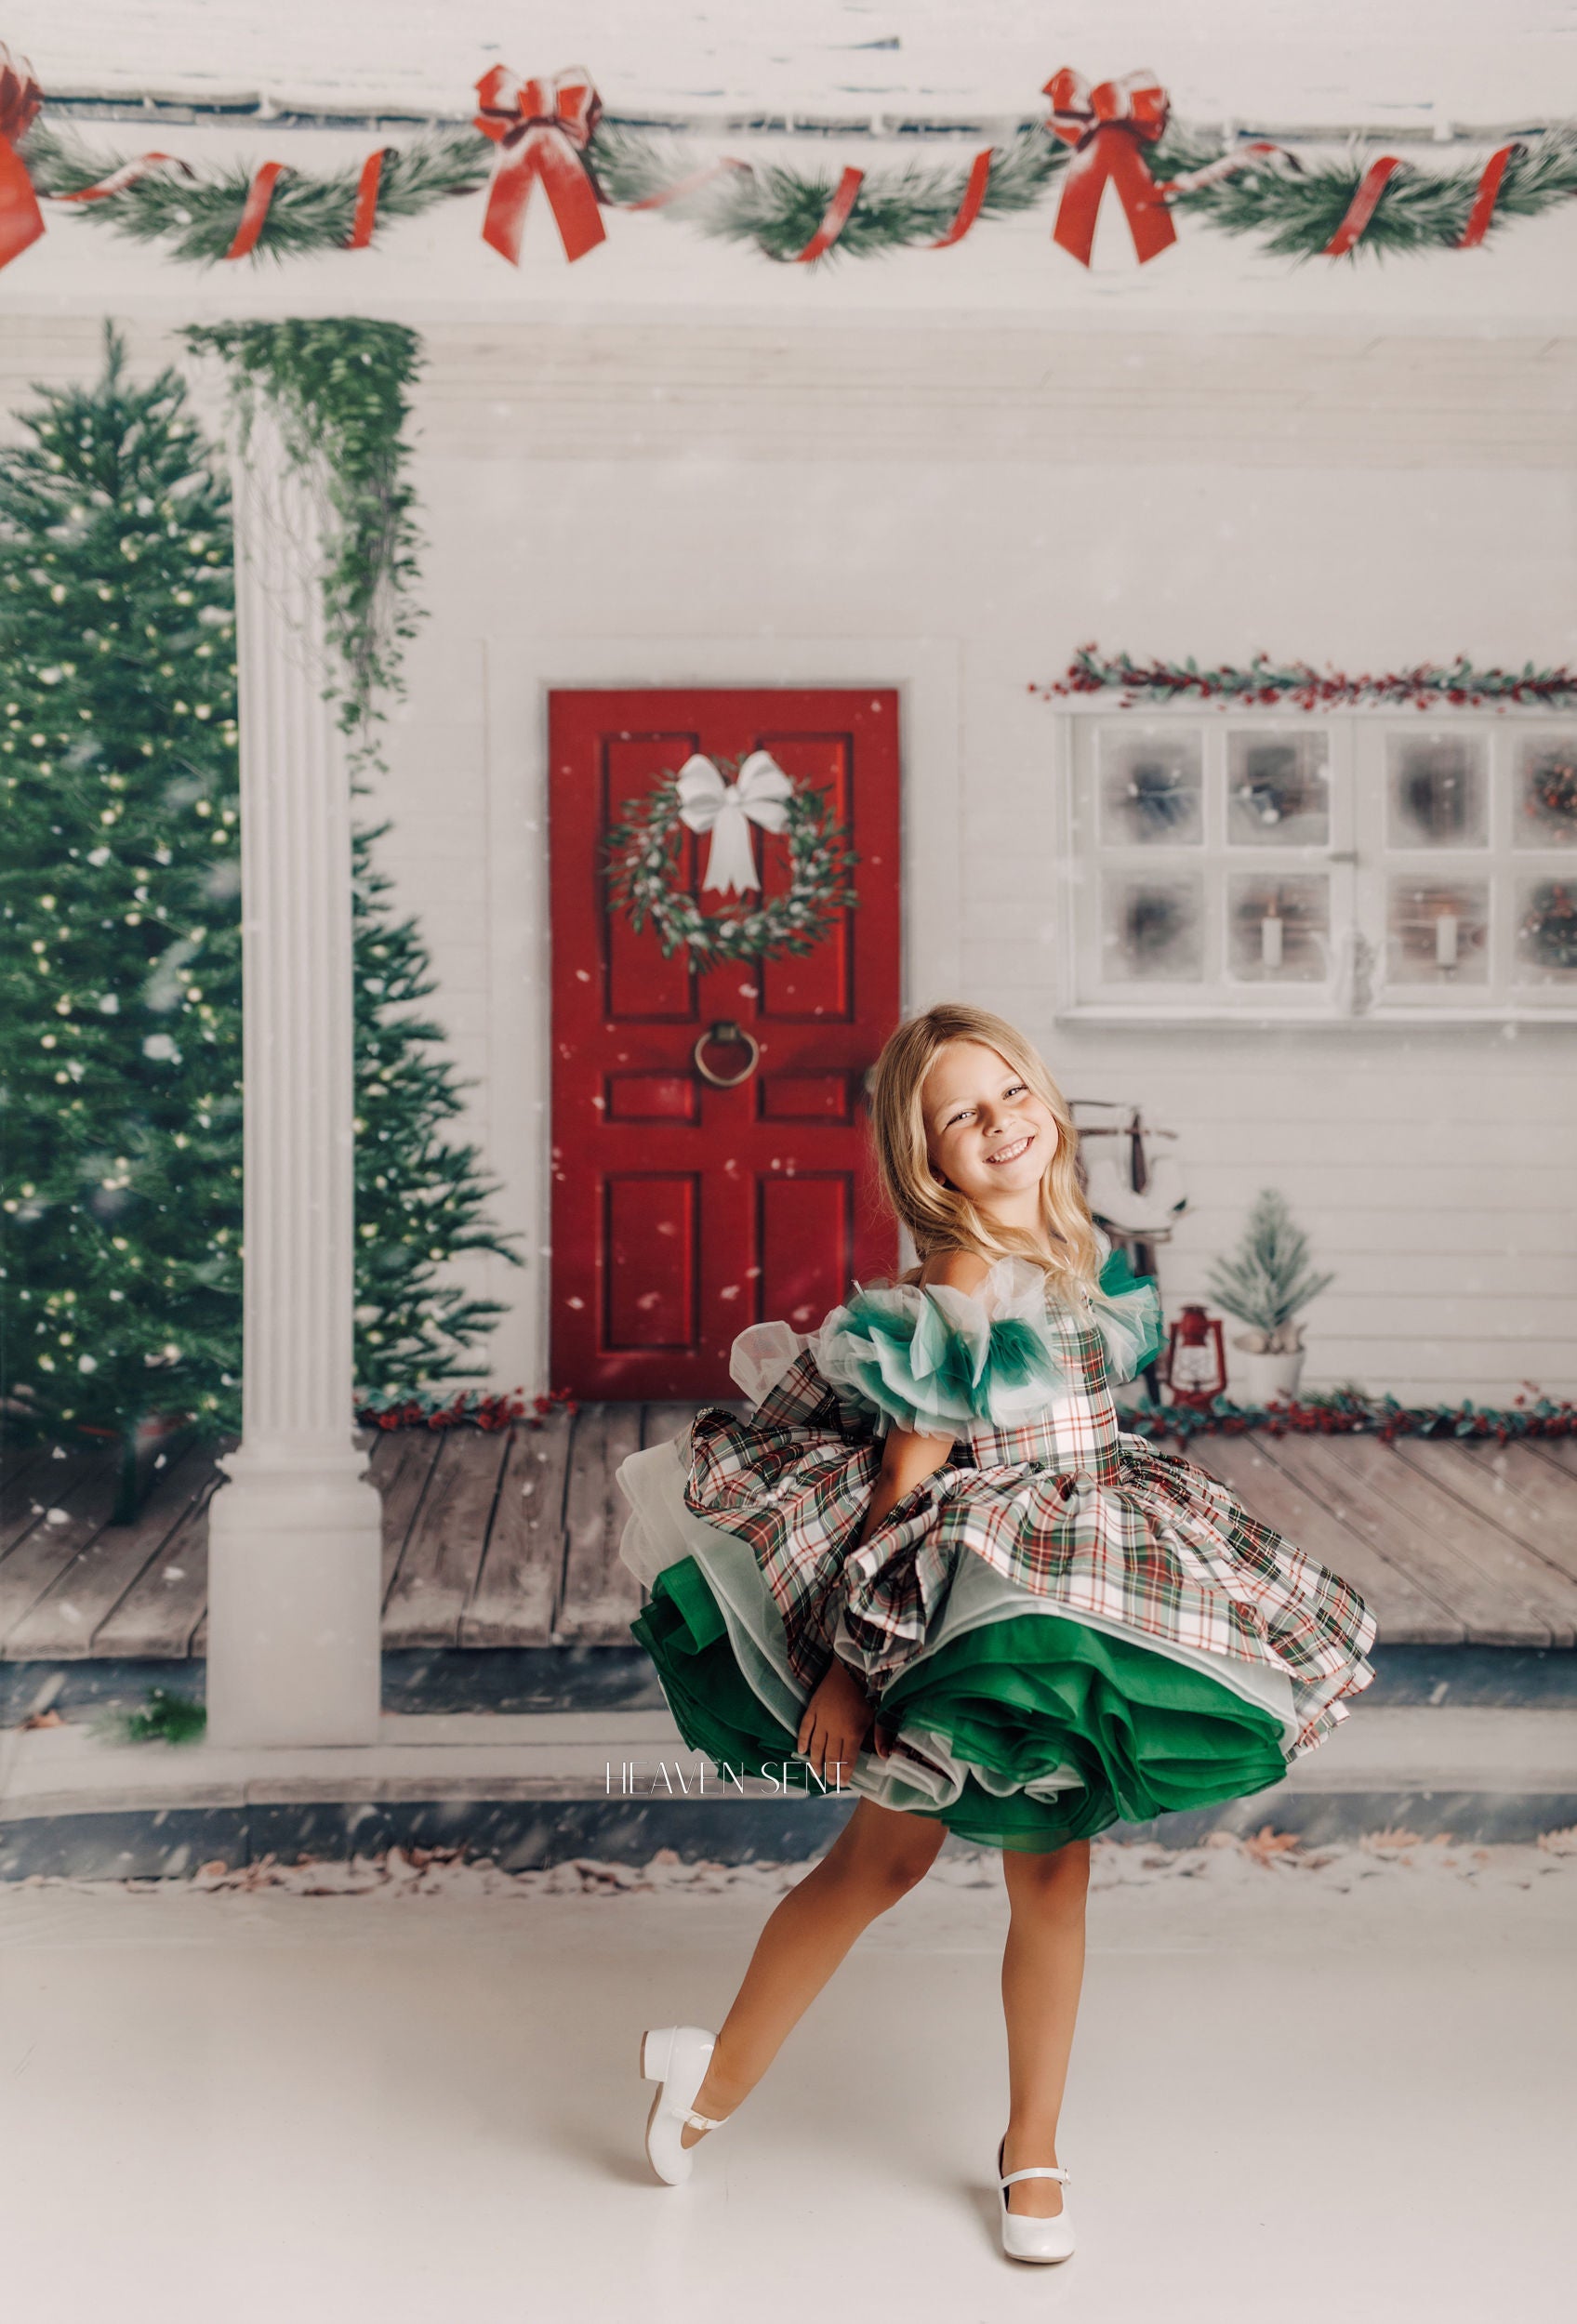 Couture-- gown rental: "Carol of the Bells" Petal Length Dress ( 4 Year - Petite 5 Year)